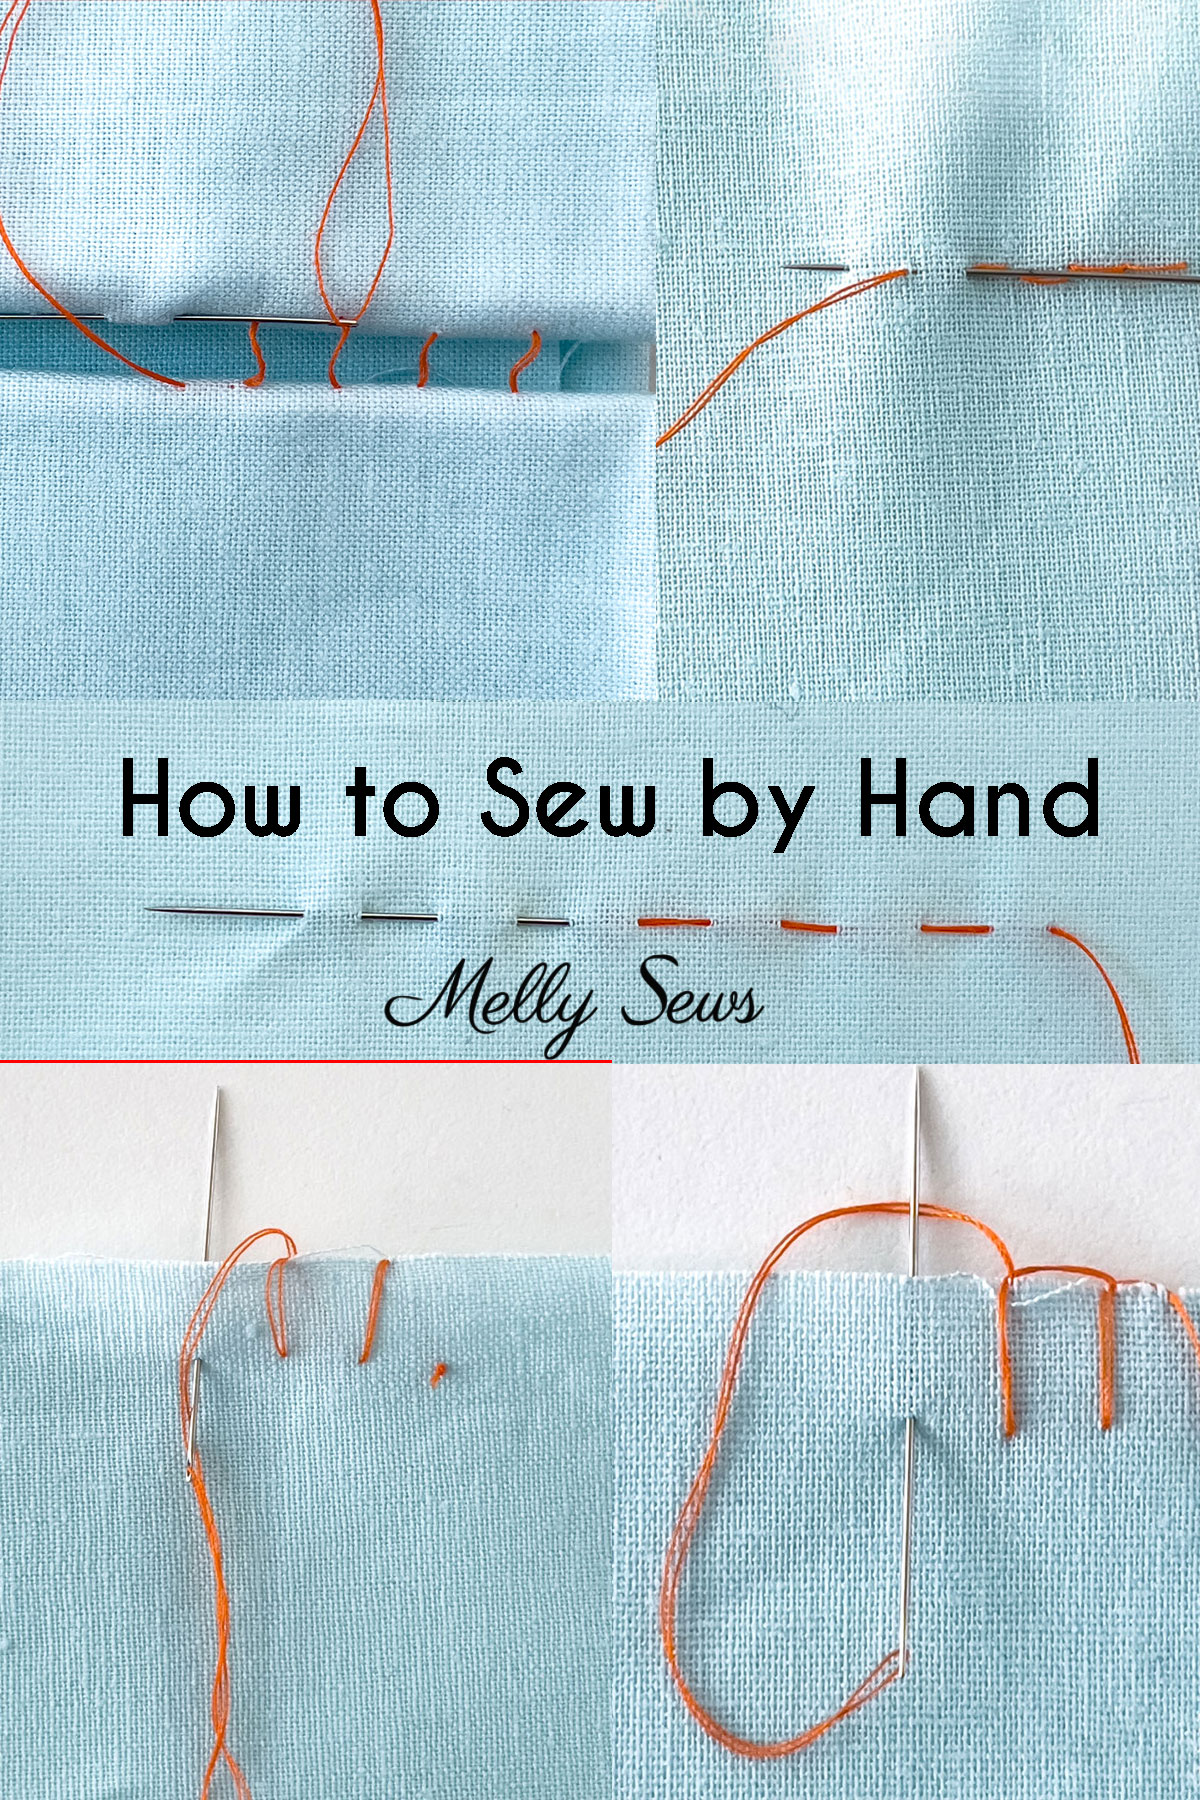 Hand Sewing Stitches for Sewing Clothes - Melly Sews